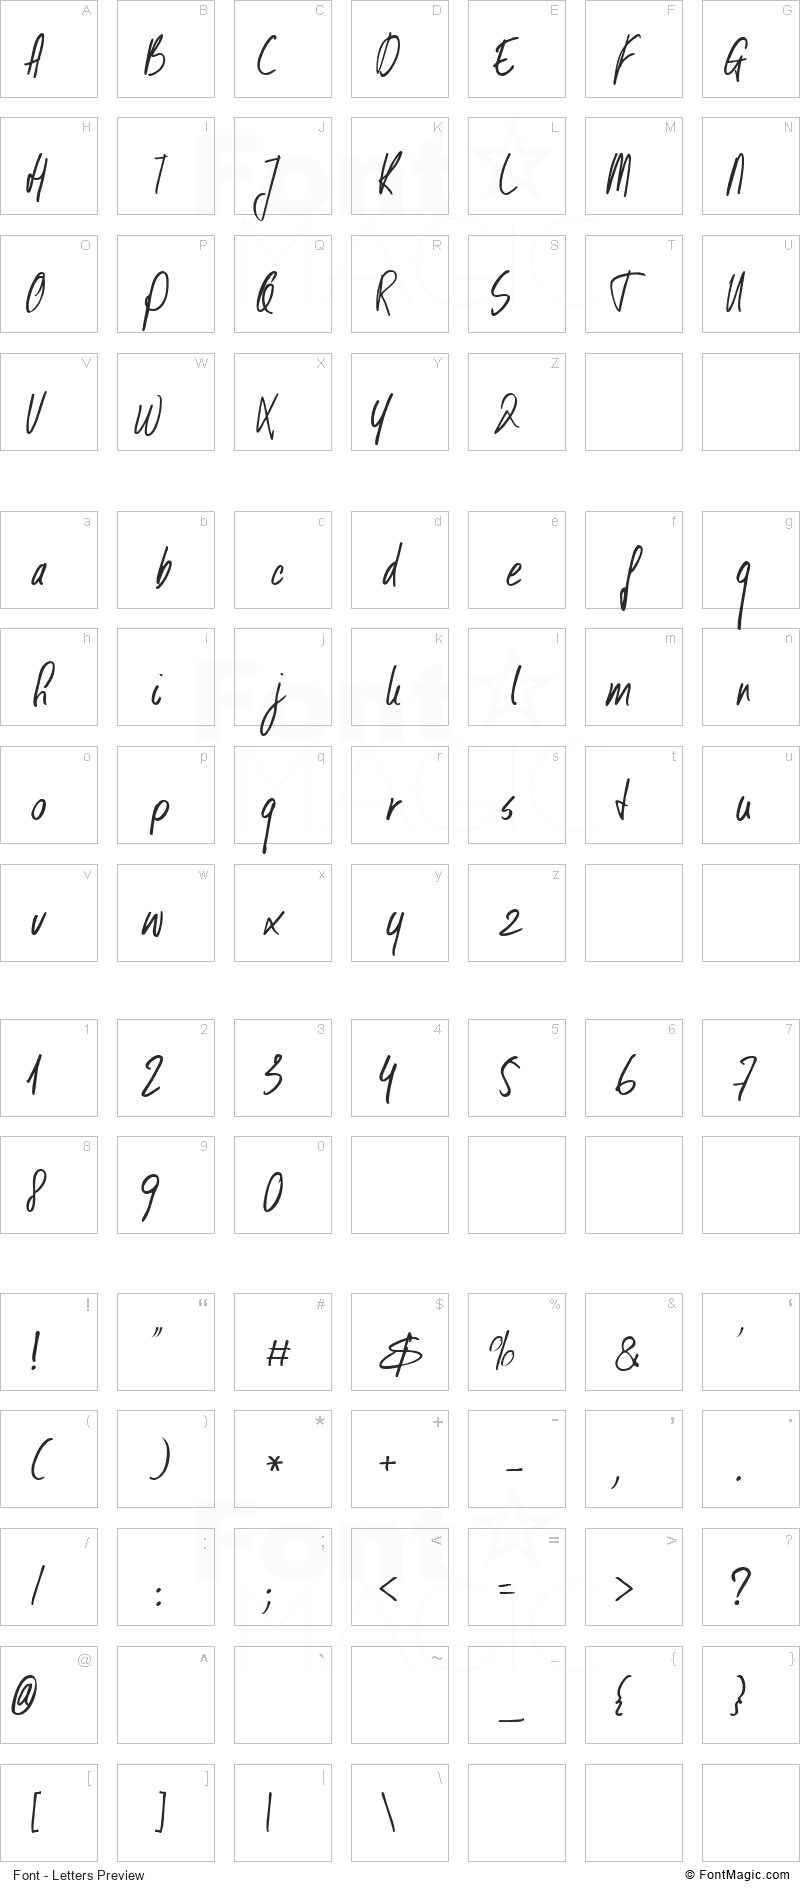 DK Kusukusu Font - All Latters Preview Chart